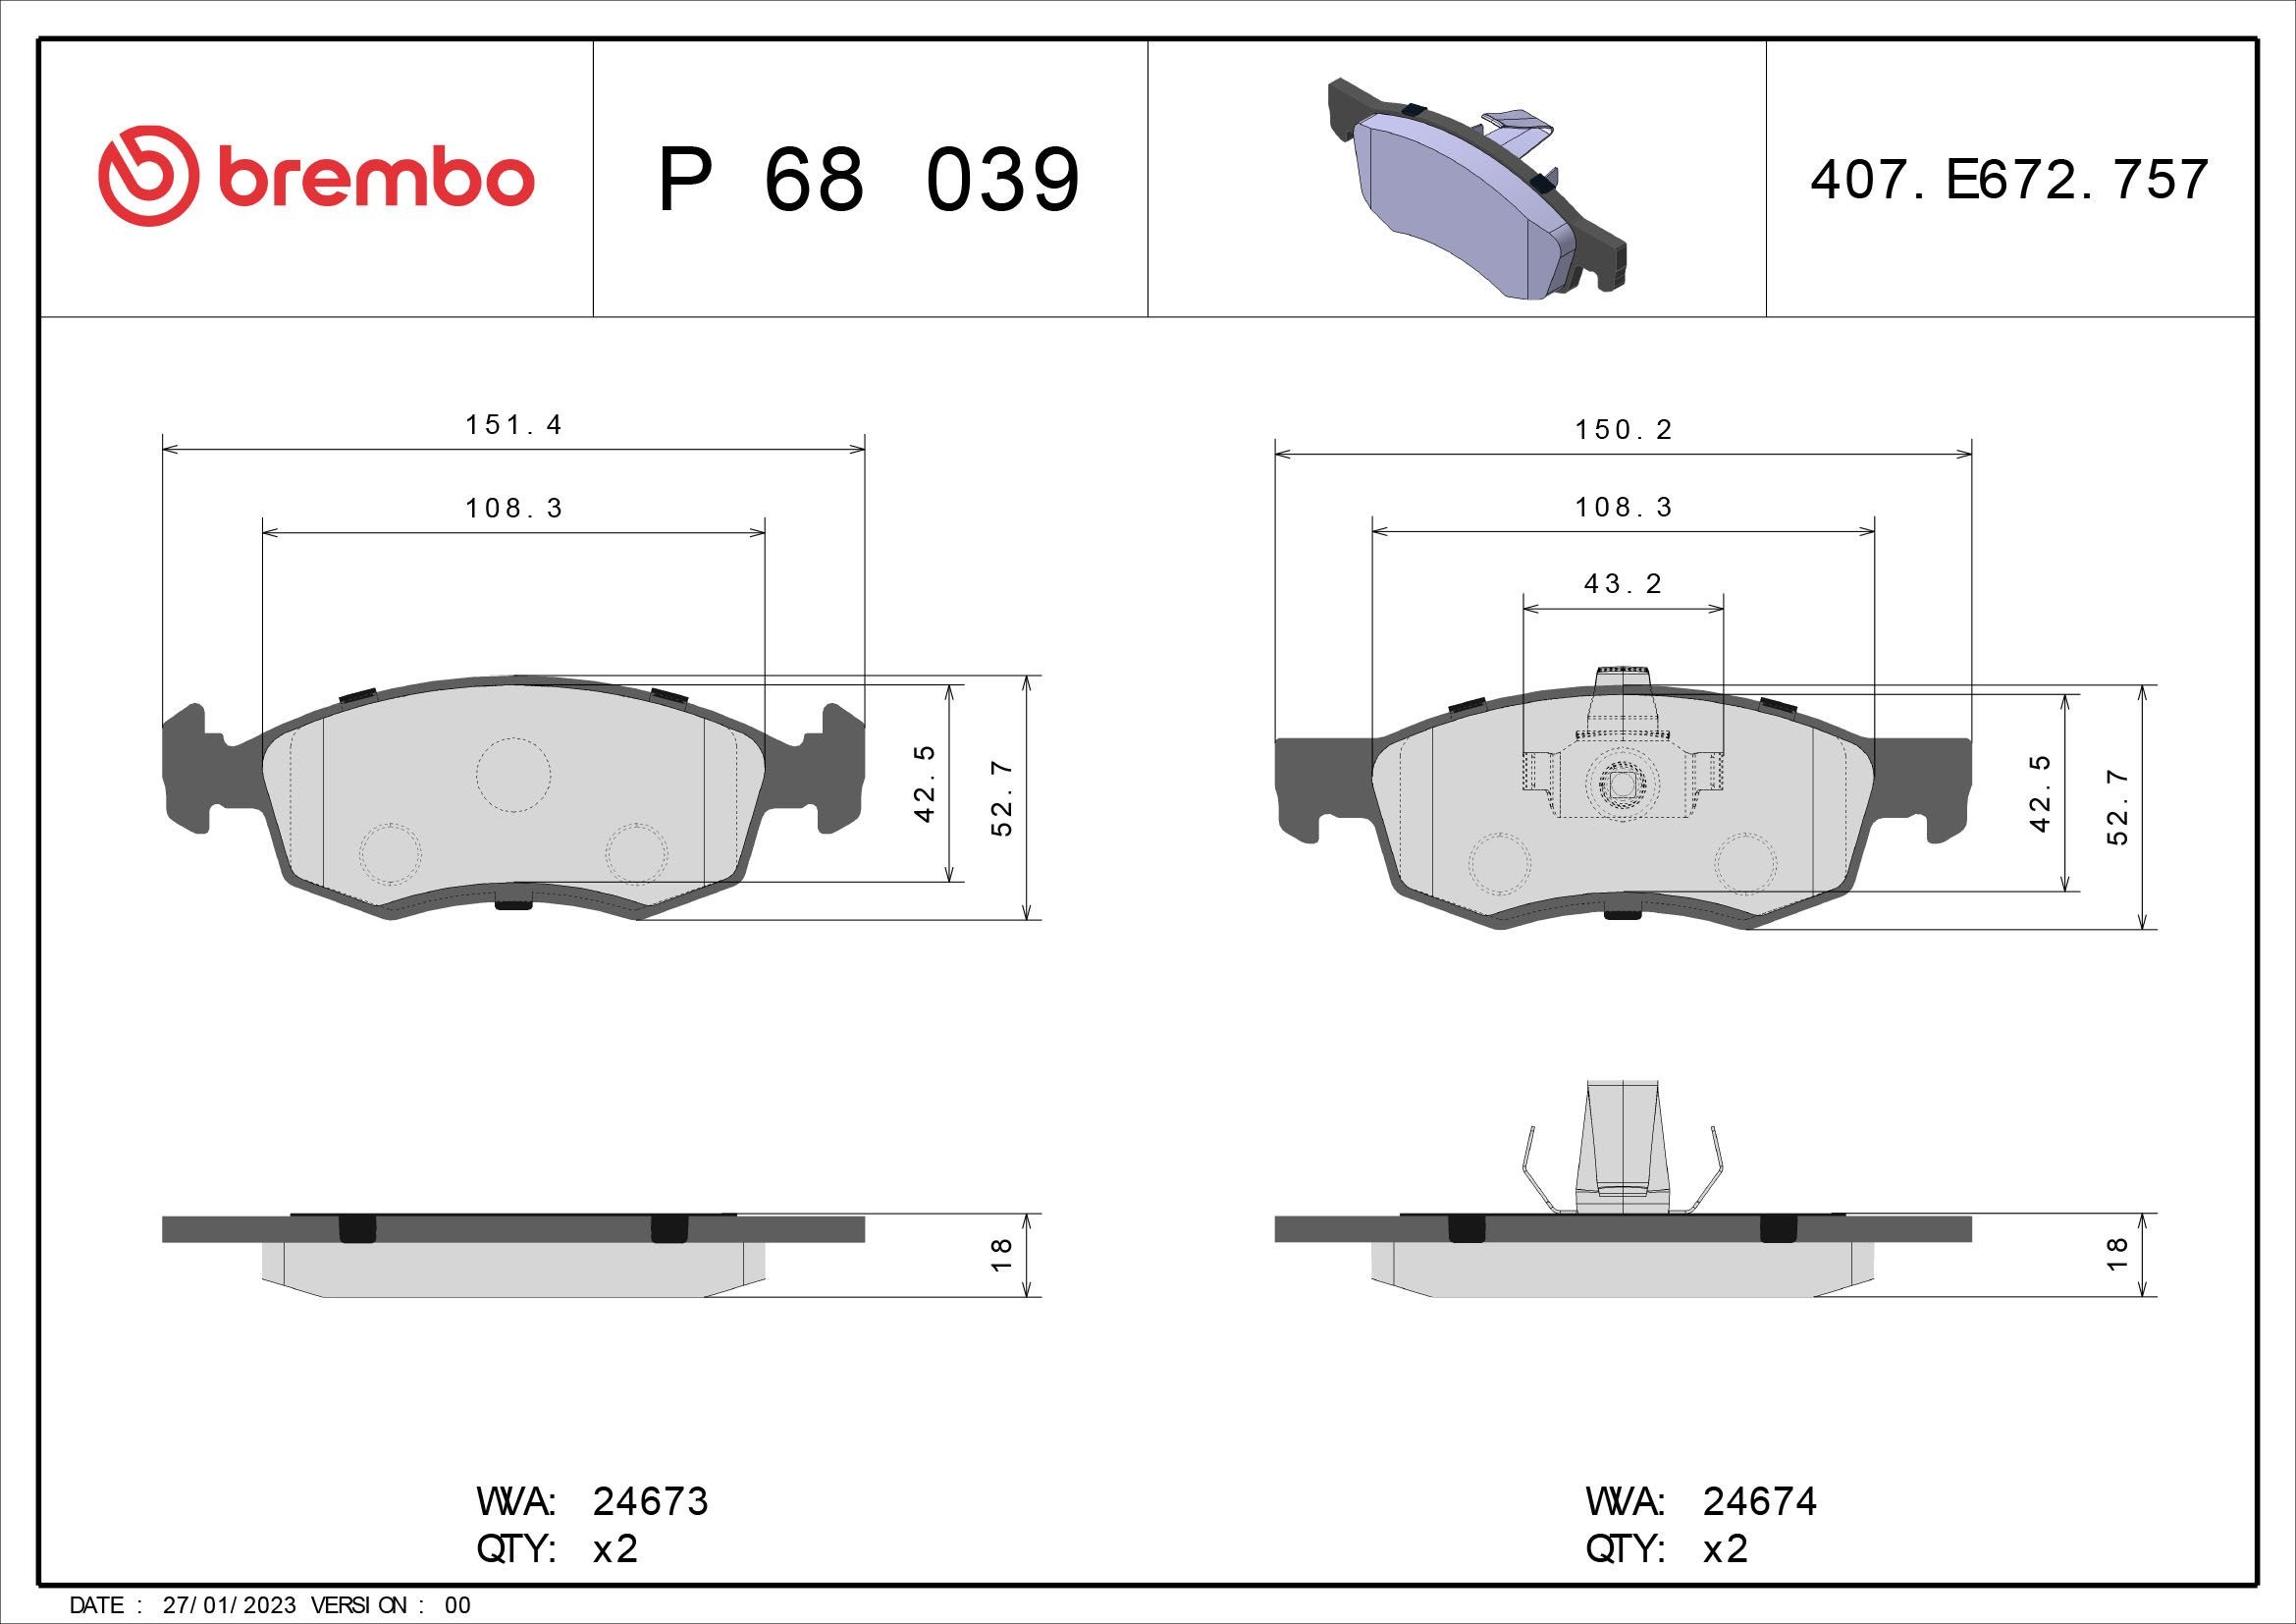 P 68 039 BREMBO Brake pad set DACIA excl. wear warning contact, without accessories